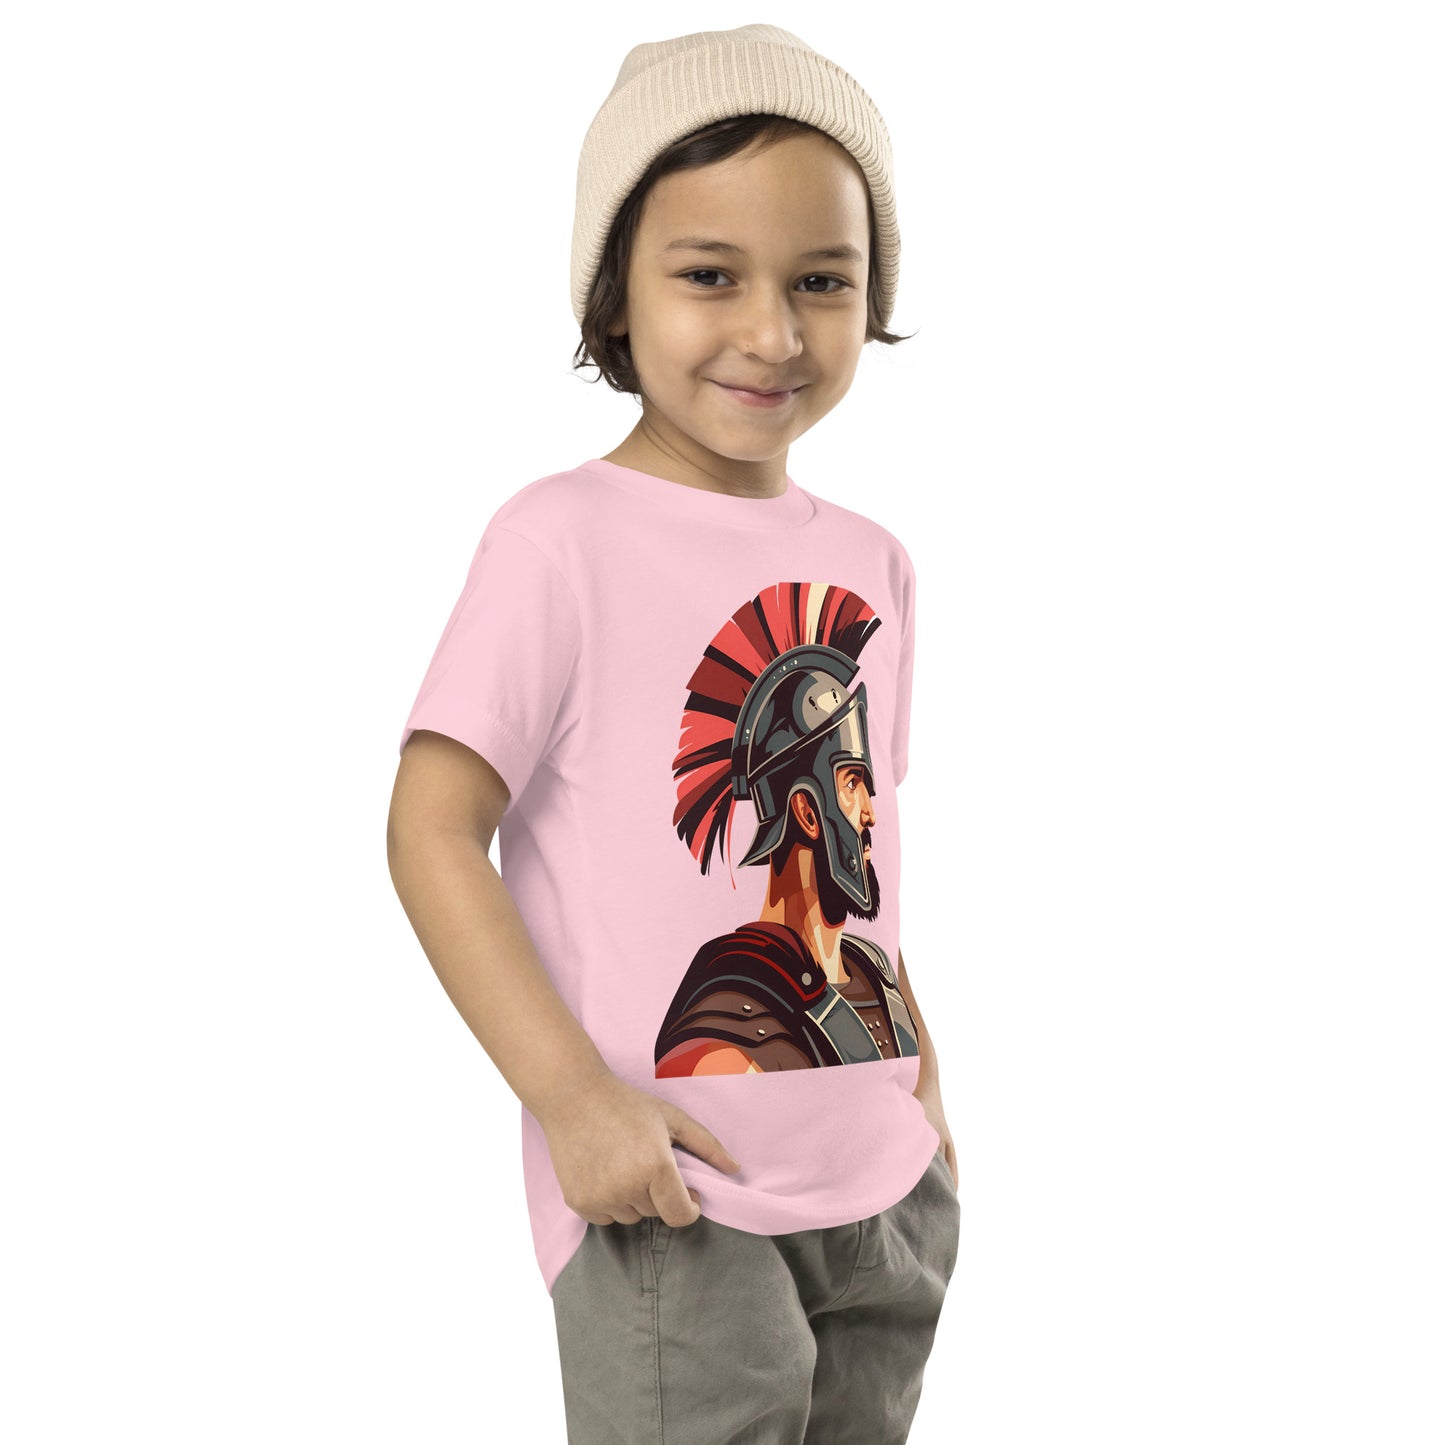 Toddler with a pink T-shirt with a print of a warrior